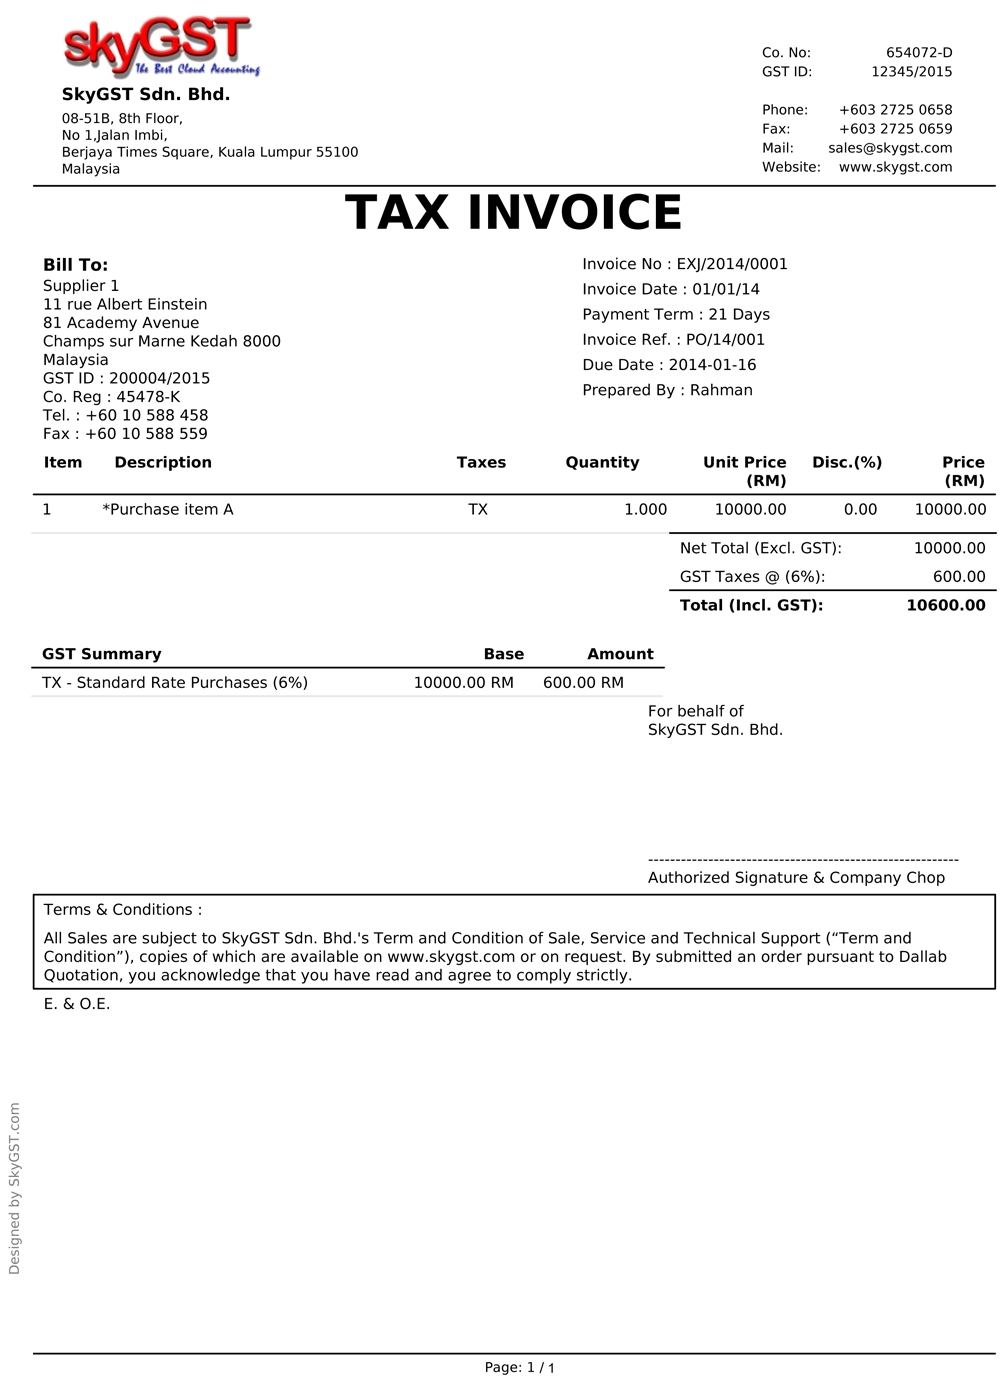 gst invoice template invoice template free 2016 invoice template with gst